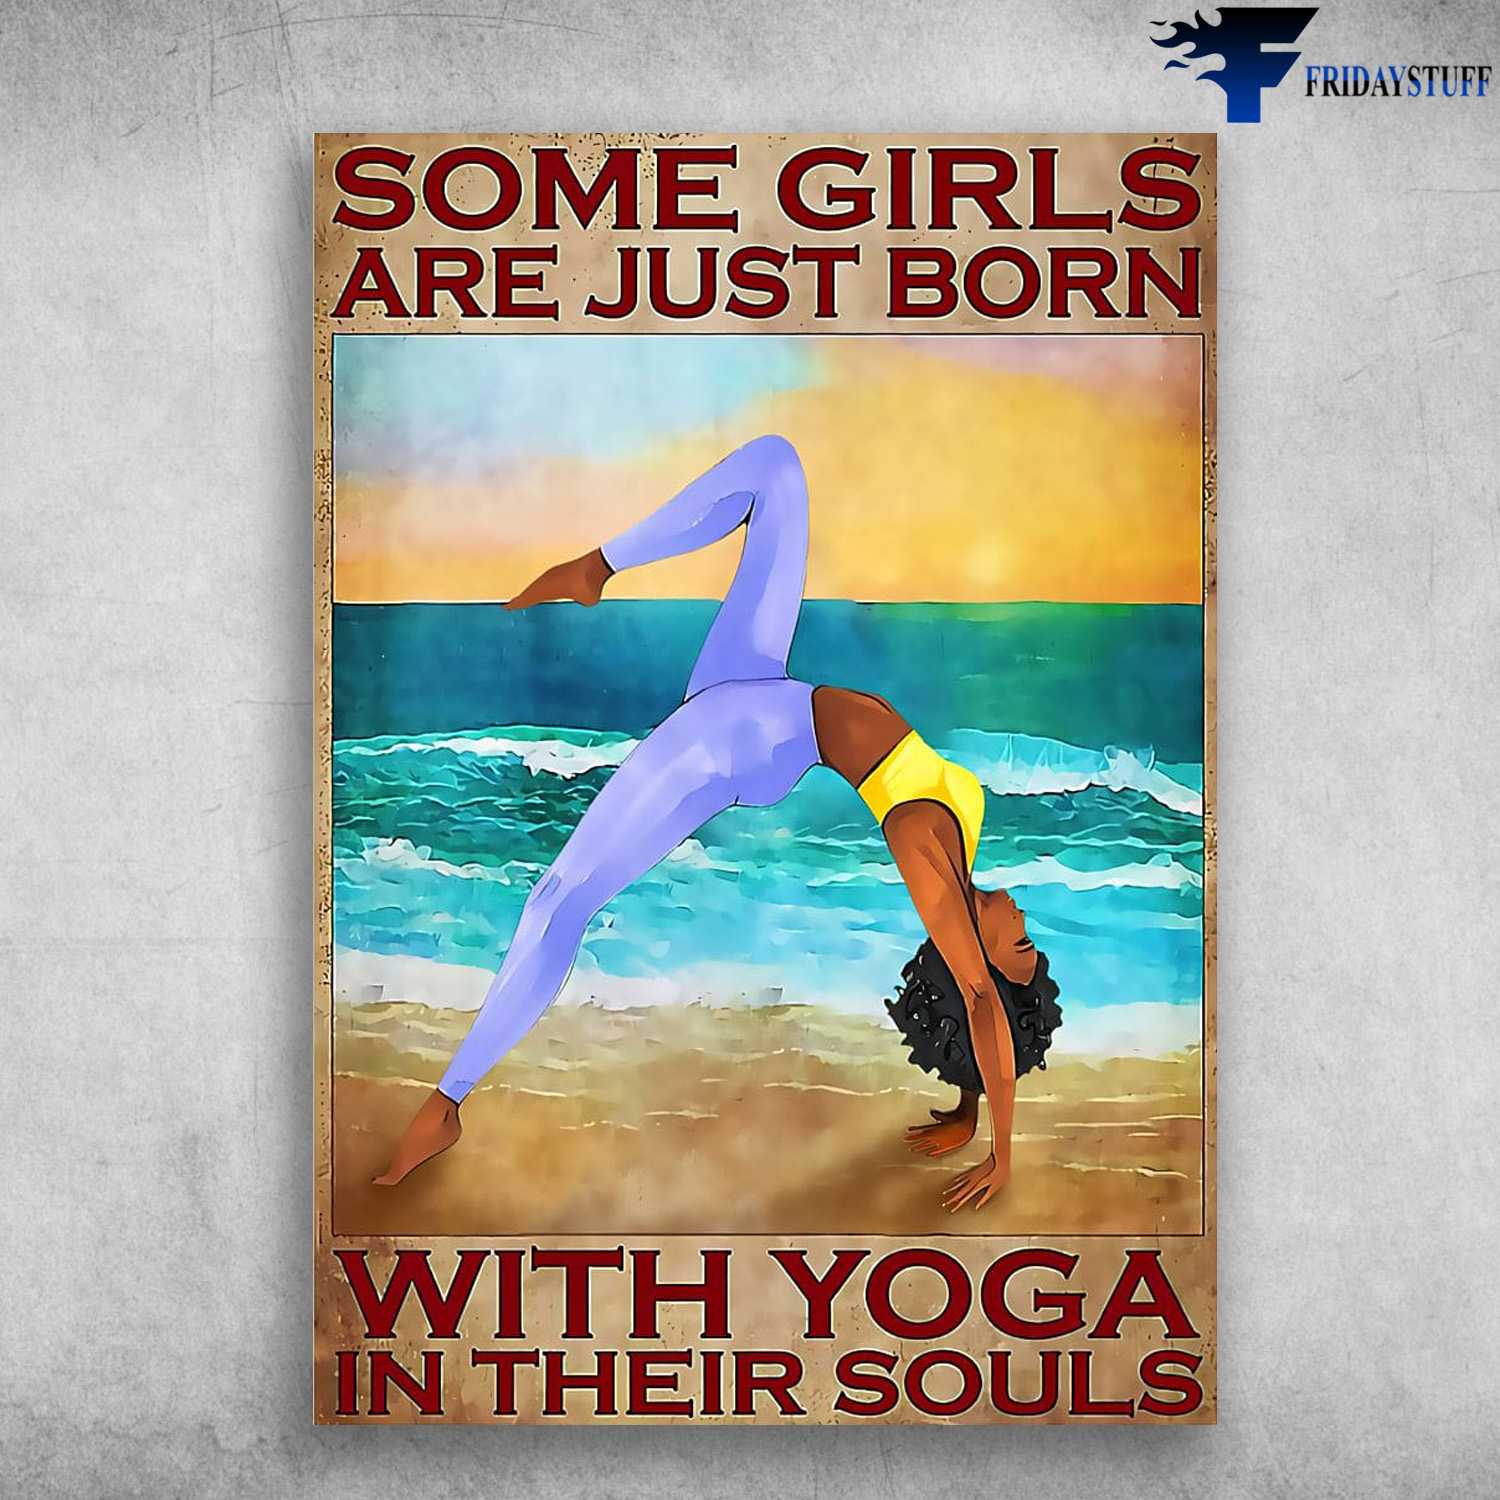 Black Girl Yoga, Yoga Poster, Some Girls Are Just Born, With Yoga In Their Souls